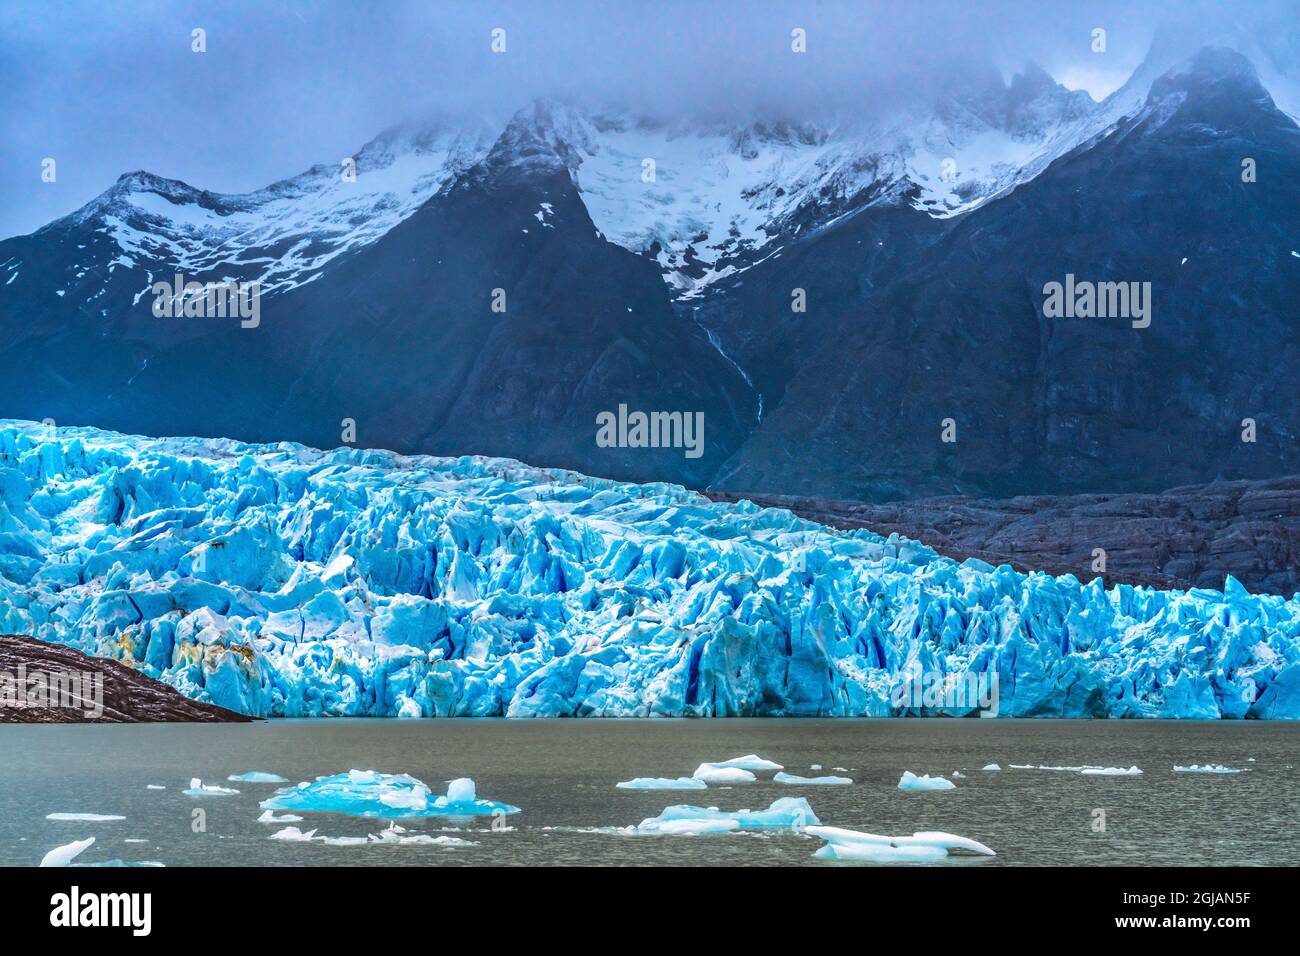 Blue Glacier Lake Southern Patagonian Ice Field, Parco Nazionale Torres del Paine, Patagonia, Cile Foto Stock